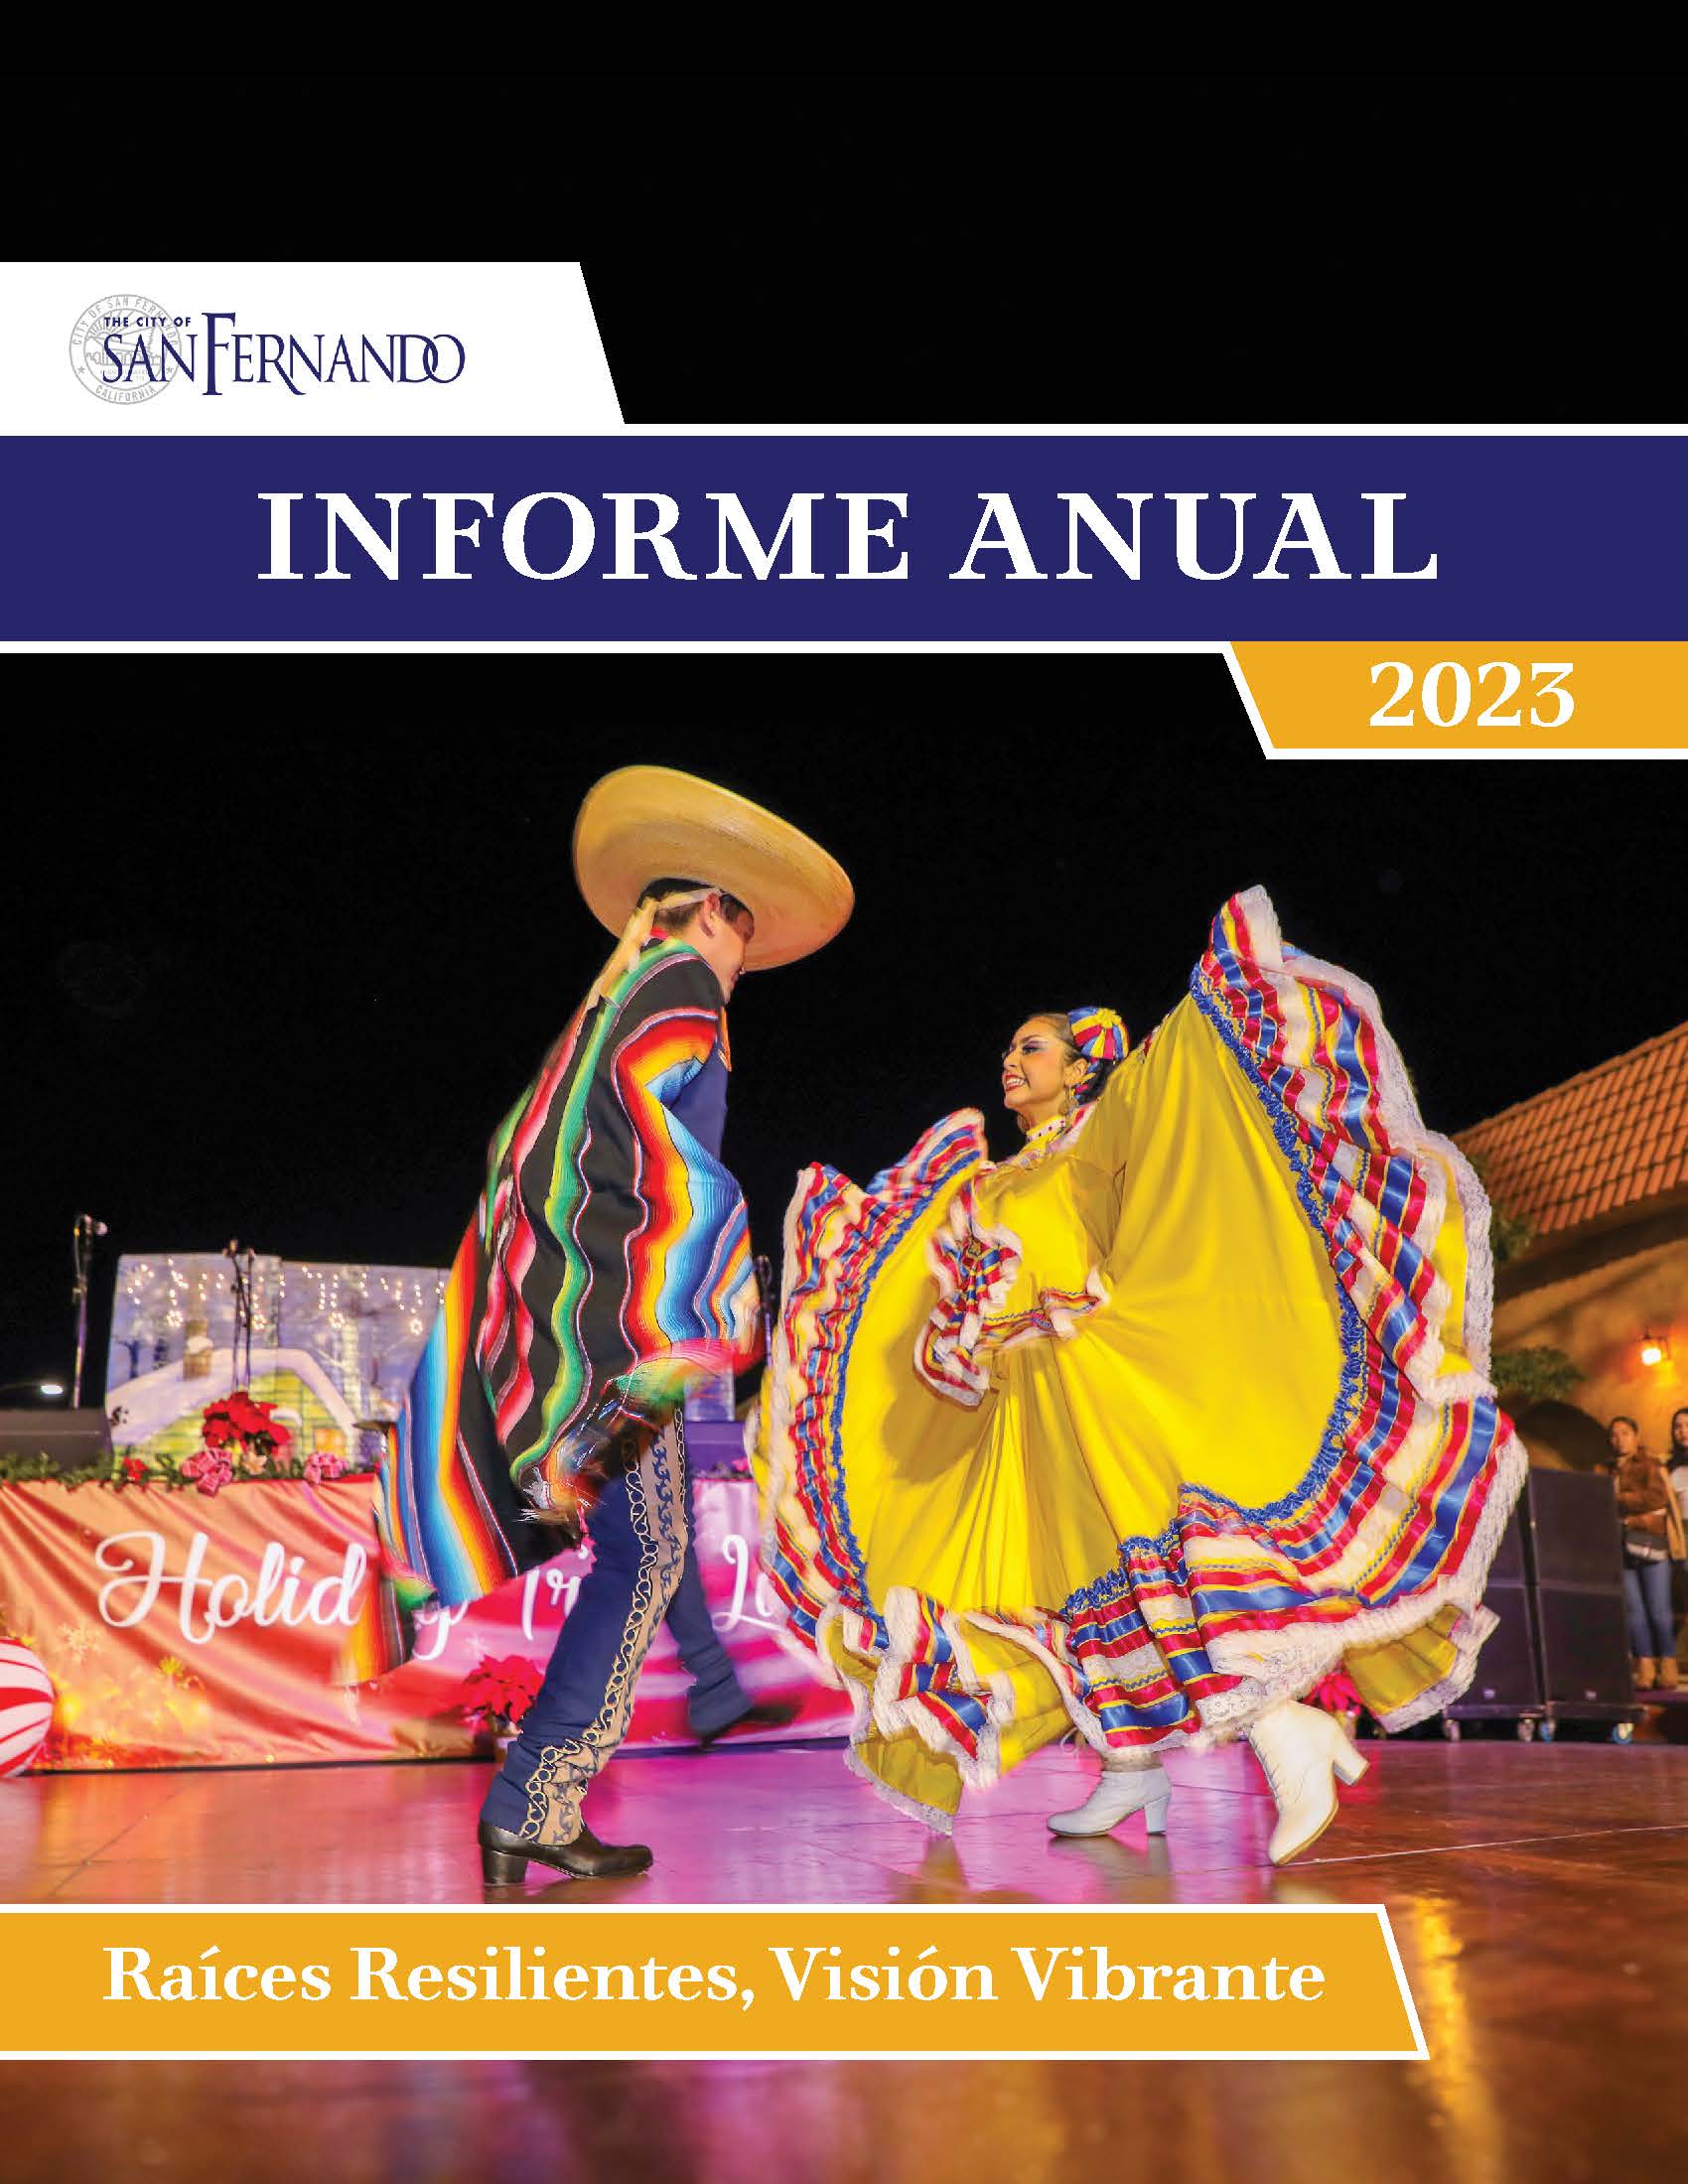 2023 San Fernando Annual Report; Photo of male and female folklorico dancers